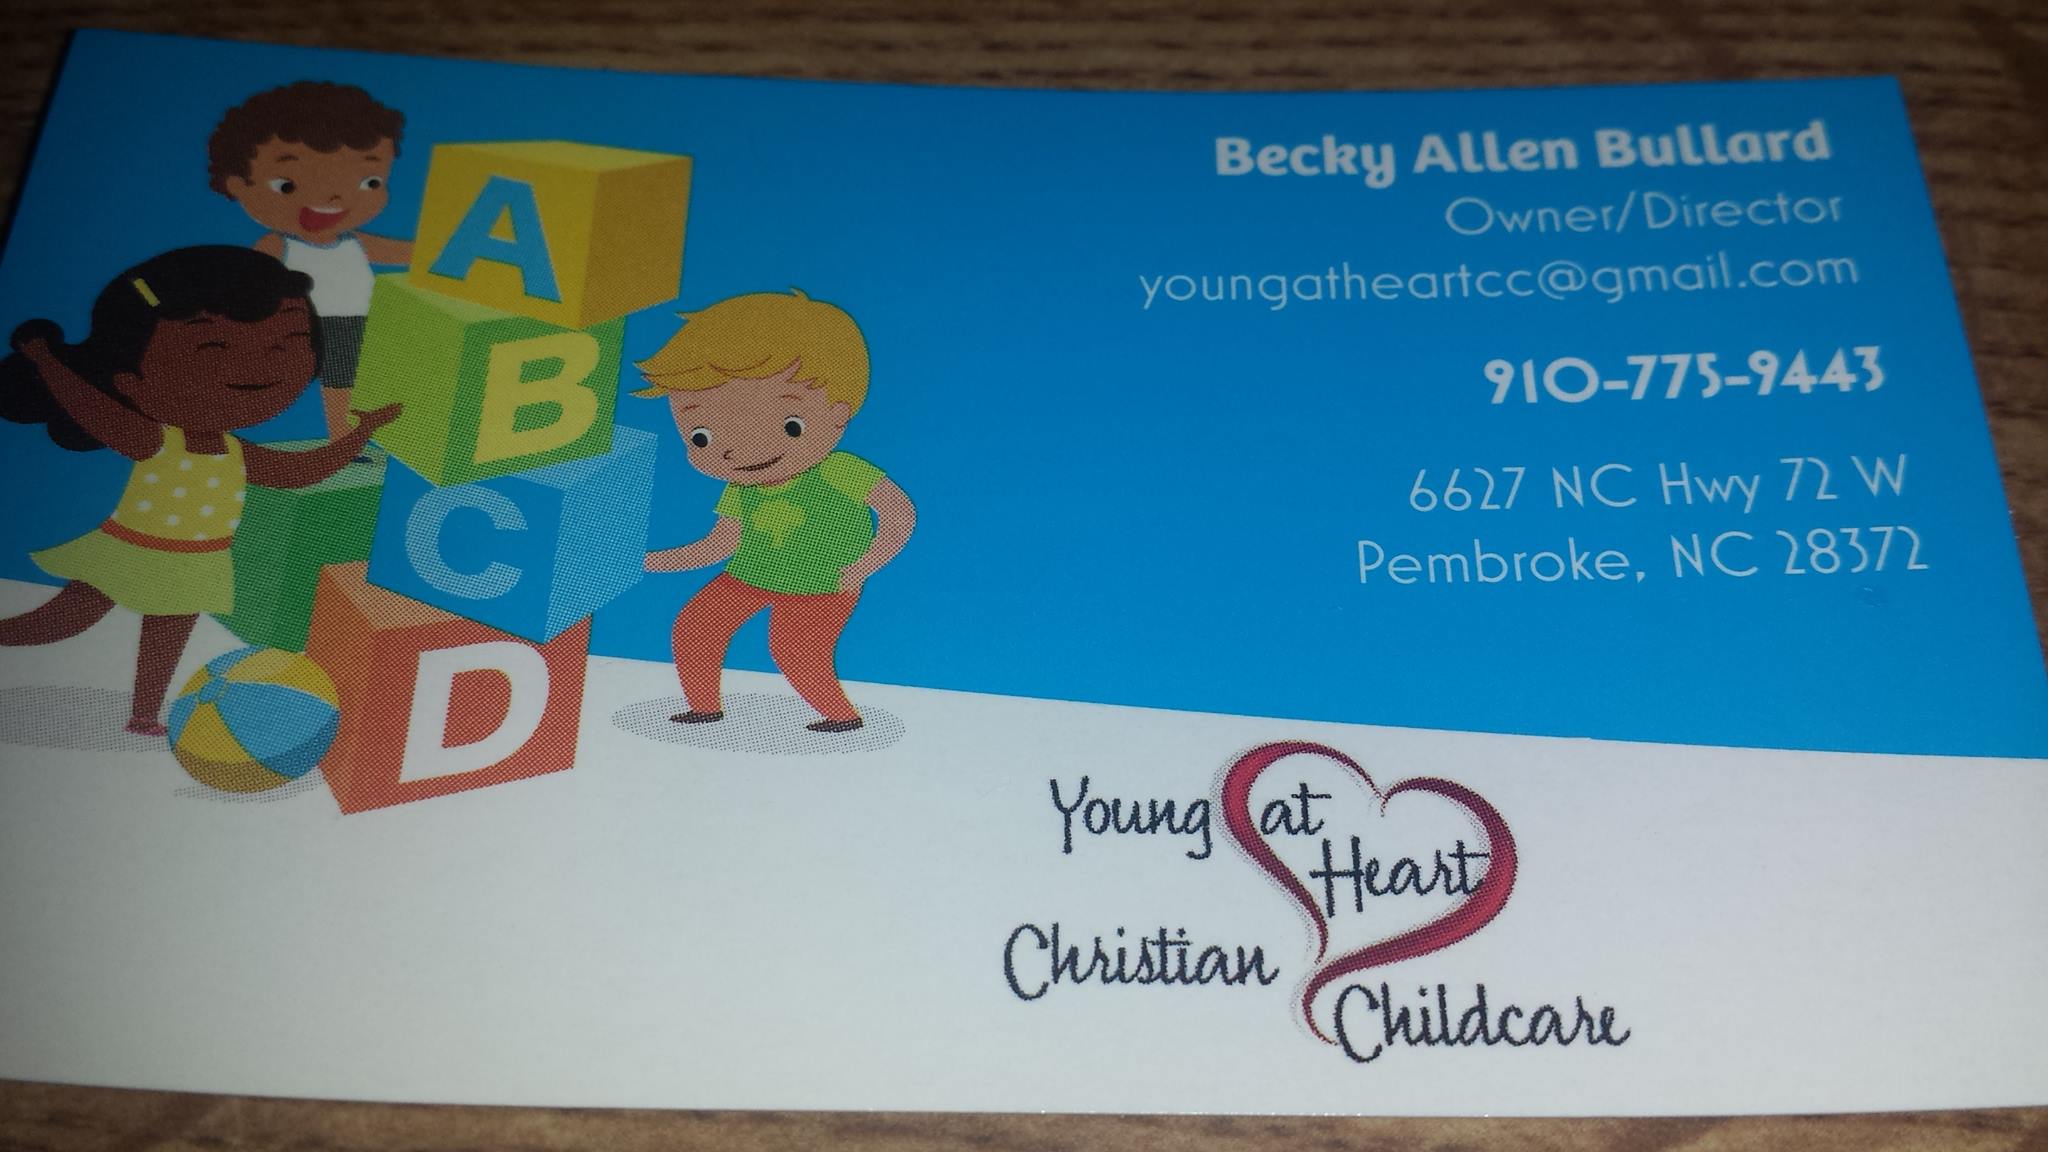 YOUNG @ HEART CHRISTIAN CHILDCARE